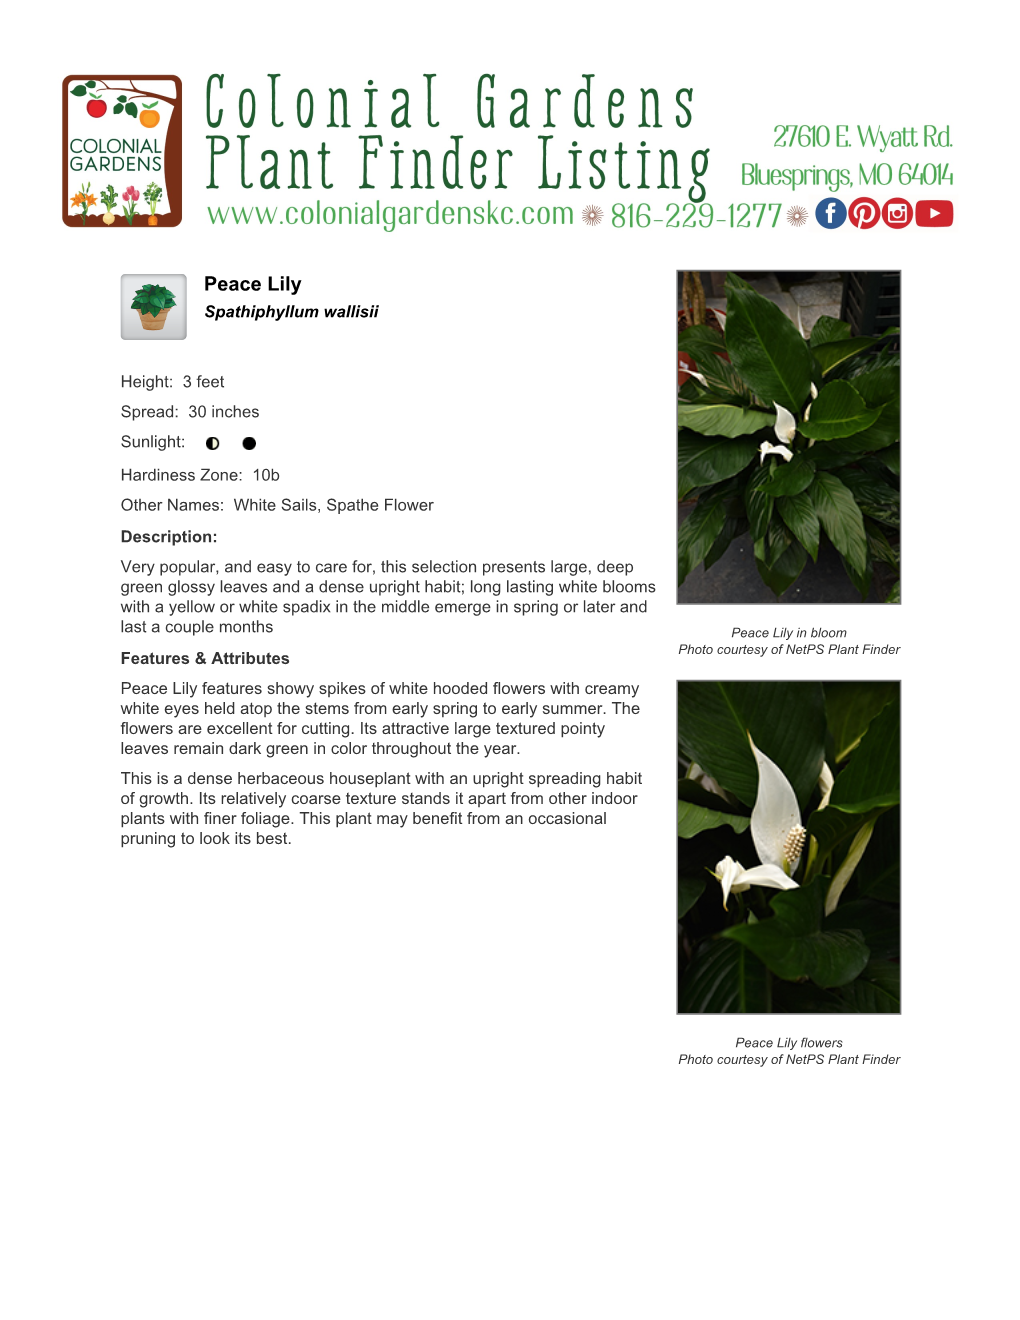 Colonial Gardens Peace Lily